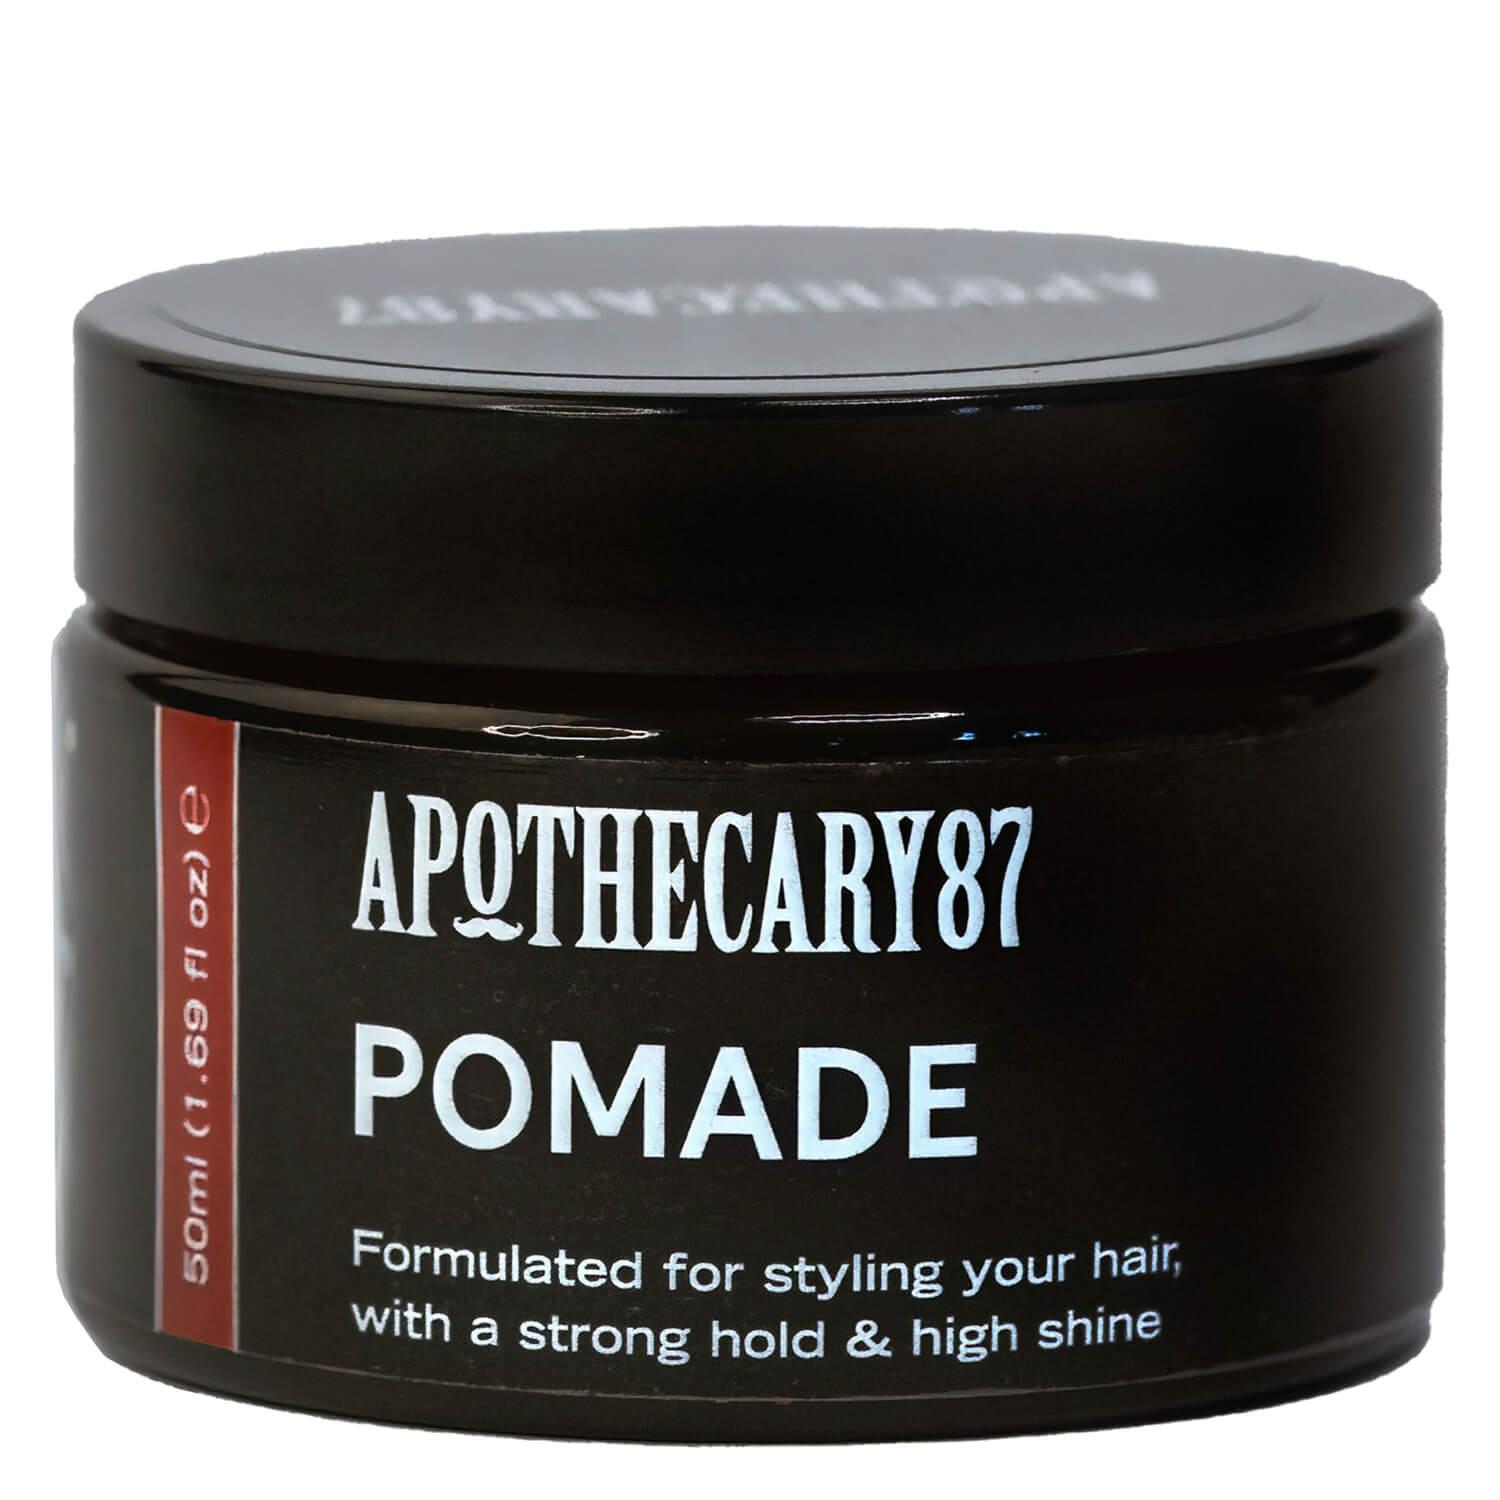 Apothecary87 Grooming - Pomade